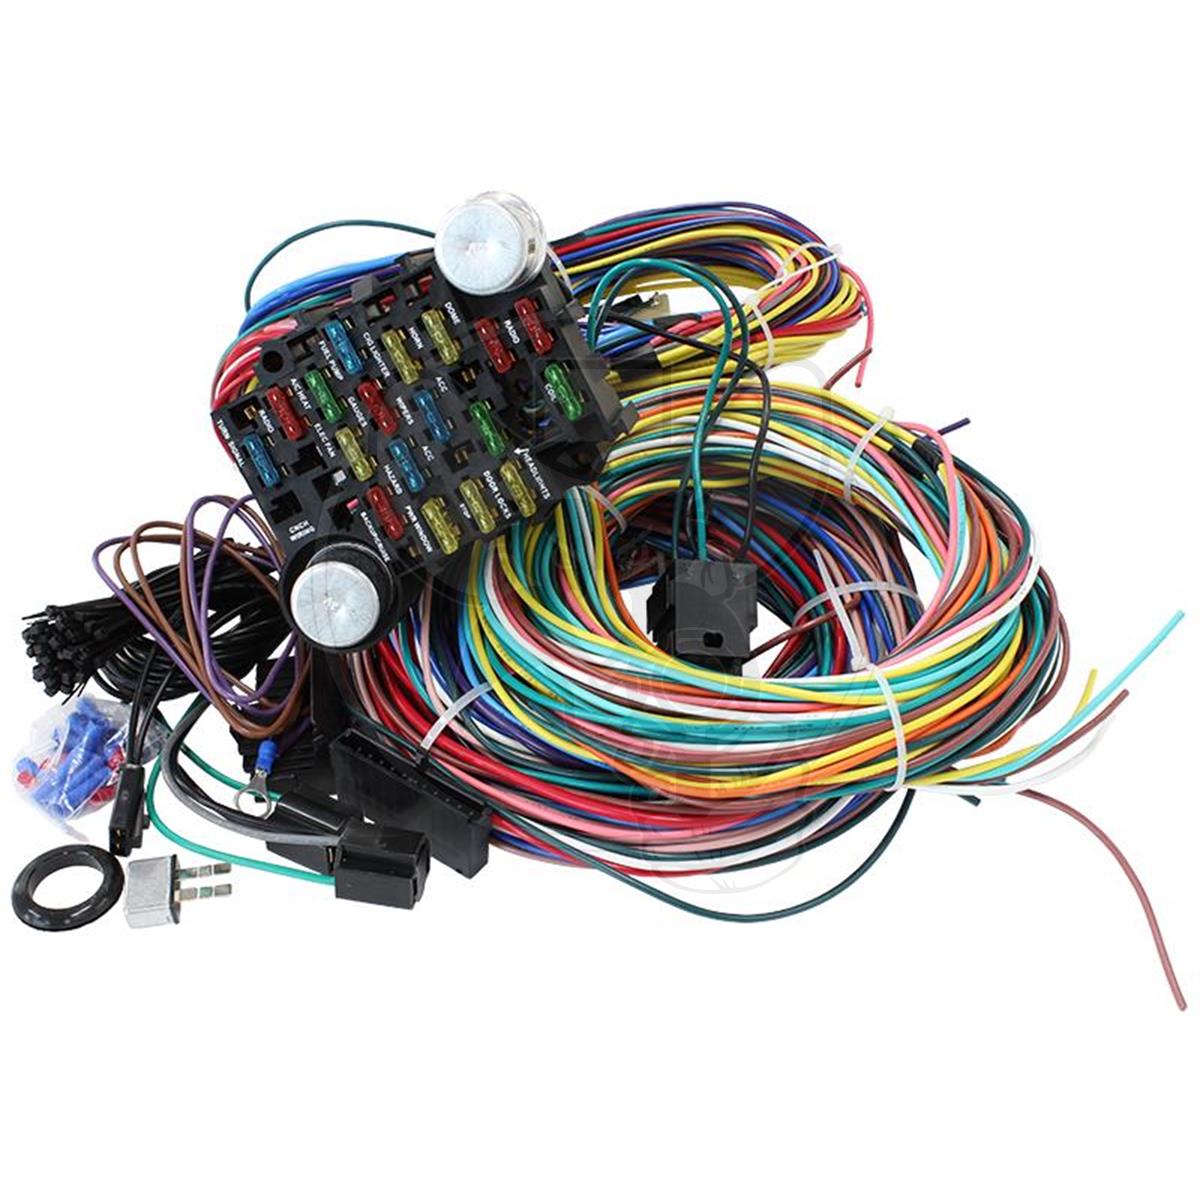 AEROFLOW COMPLETE WIRING HARNESS KIT 21-CCT W/STD FUSES & FUSE PANEL